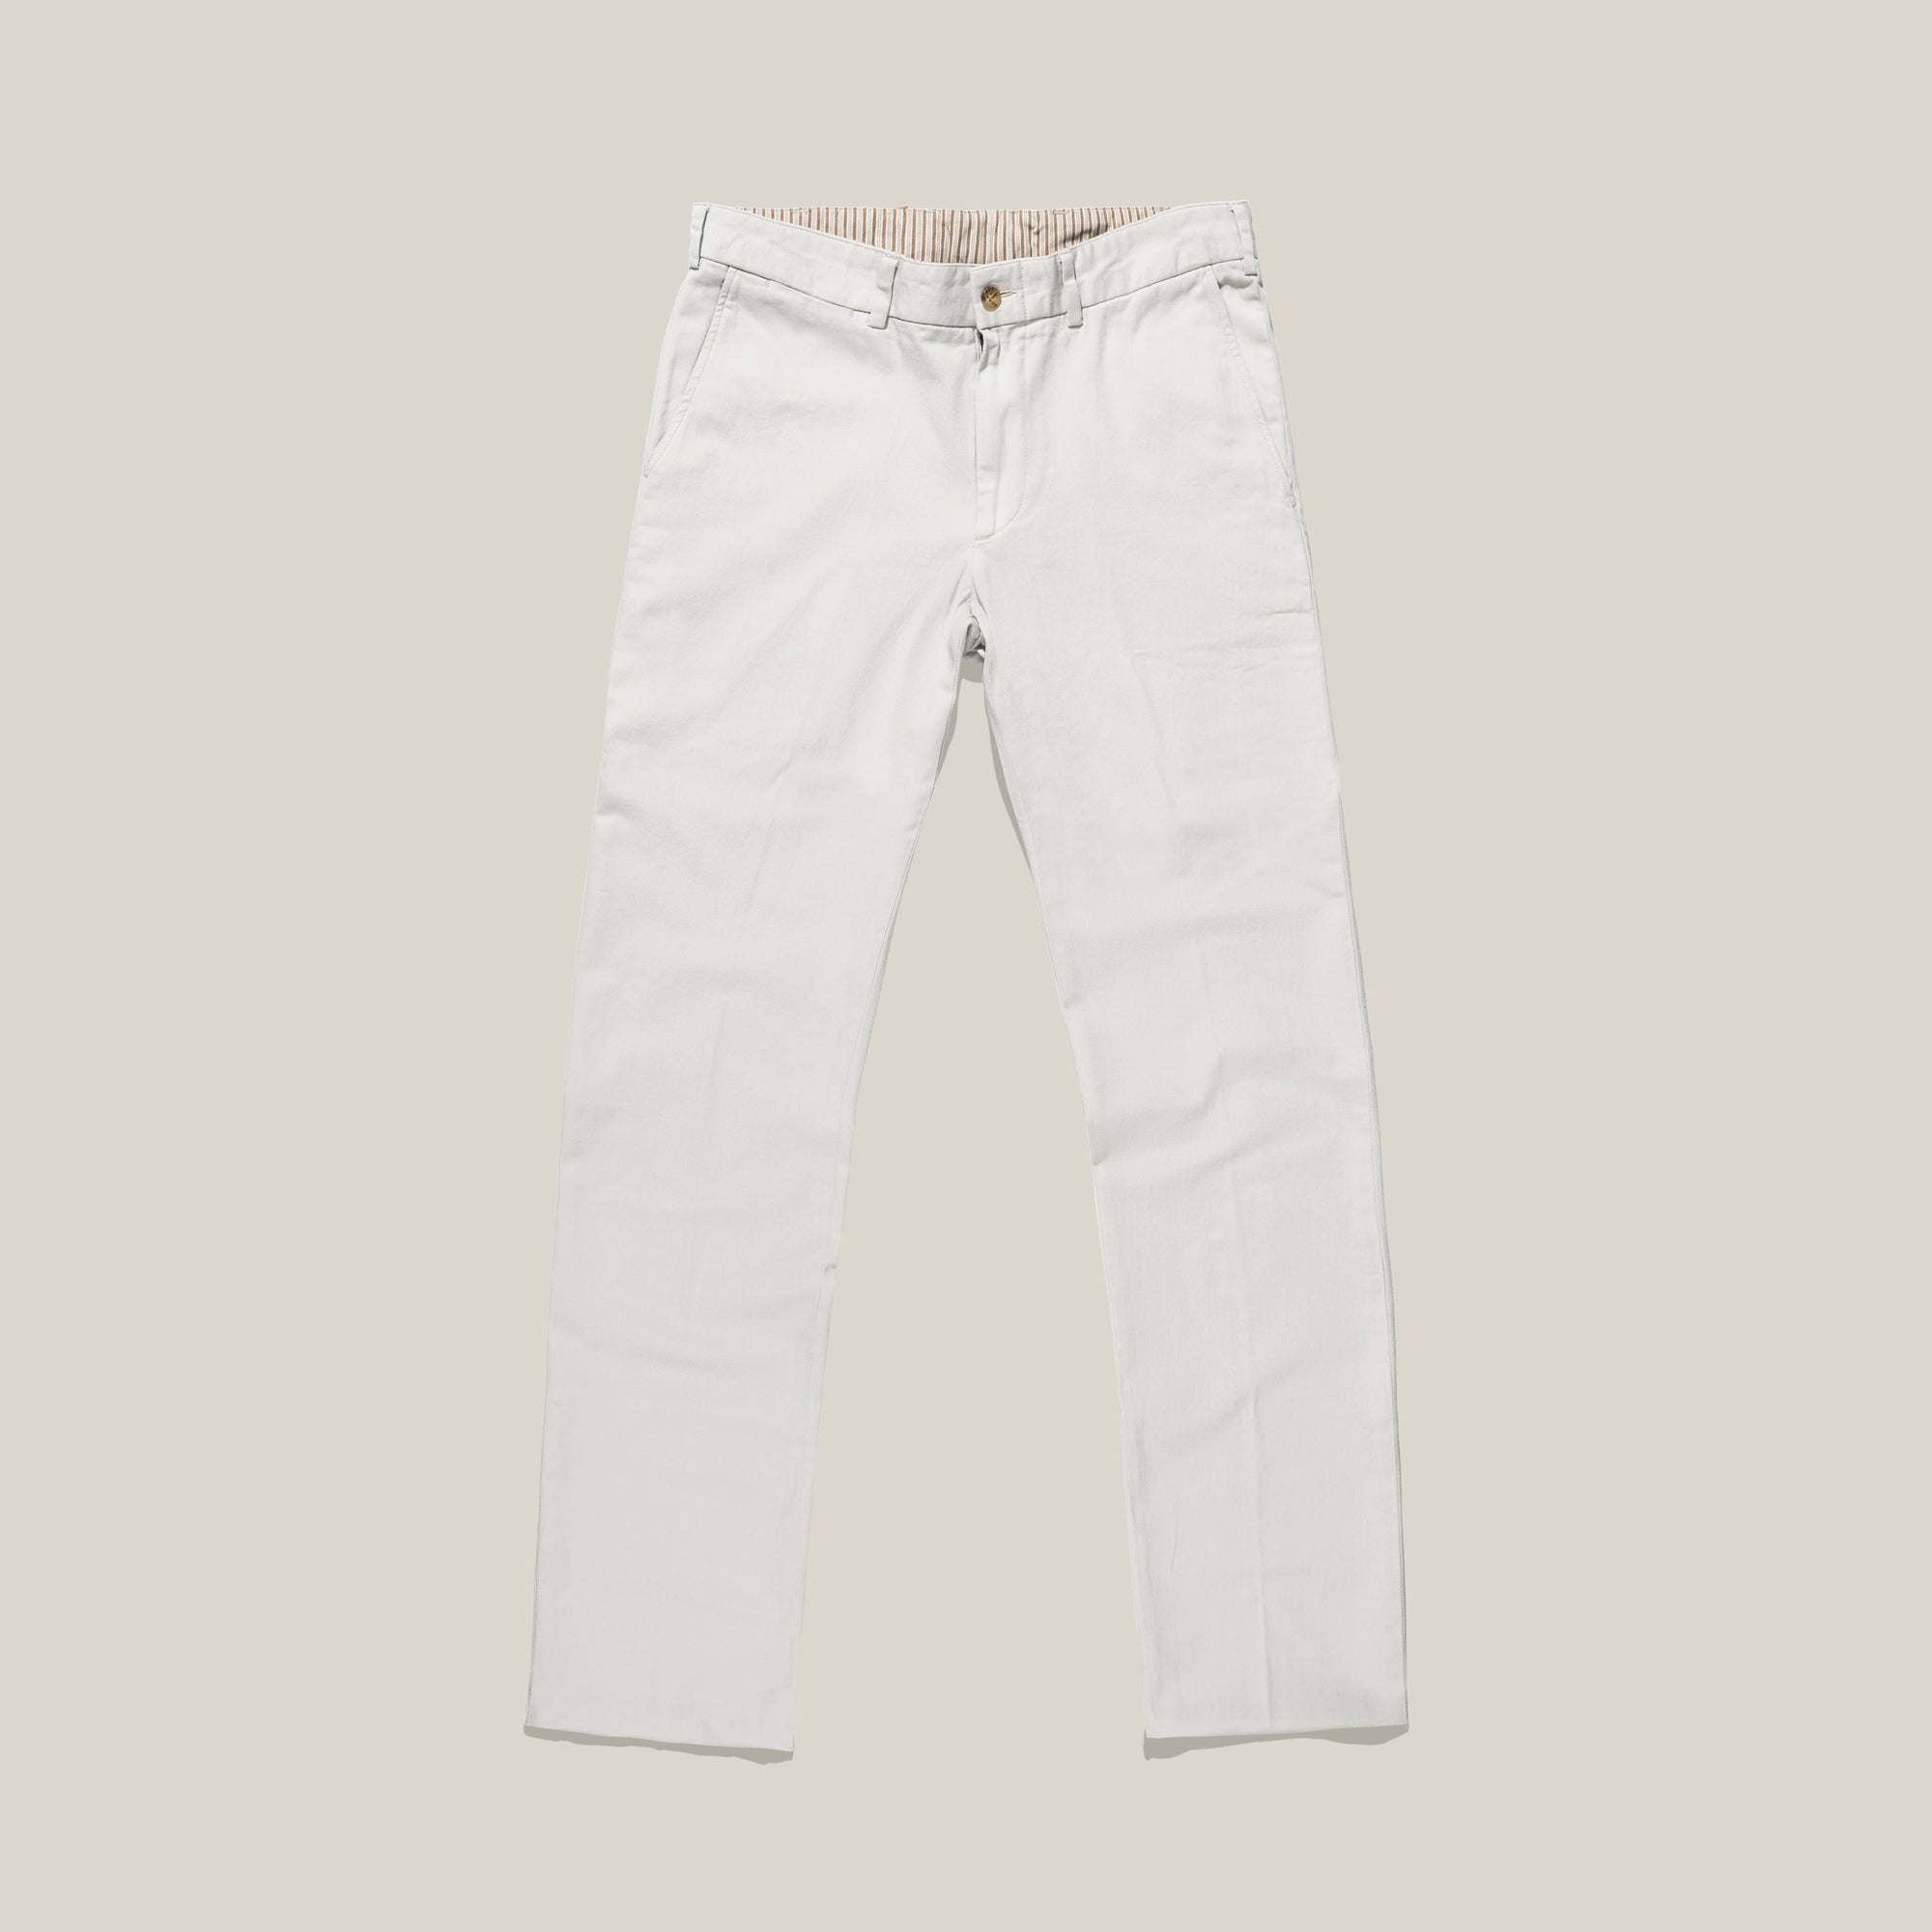 M2 Classic Fit Vintage Twills in Stone by Bills Khakis